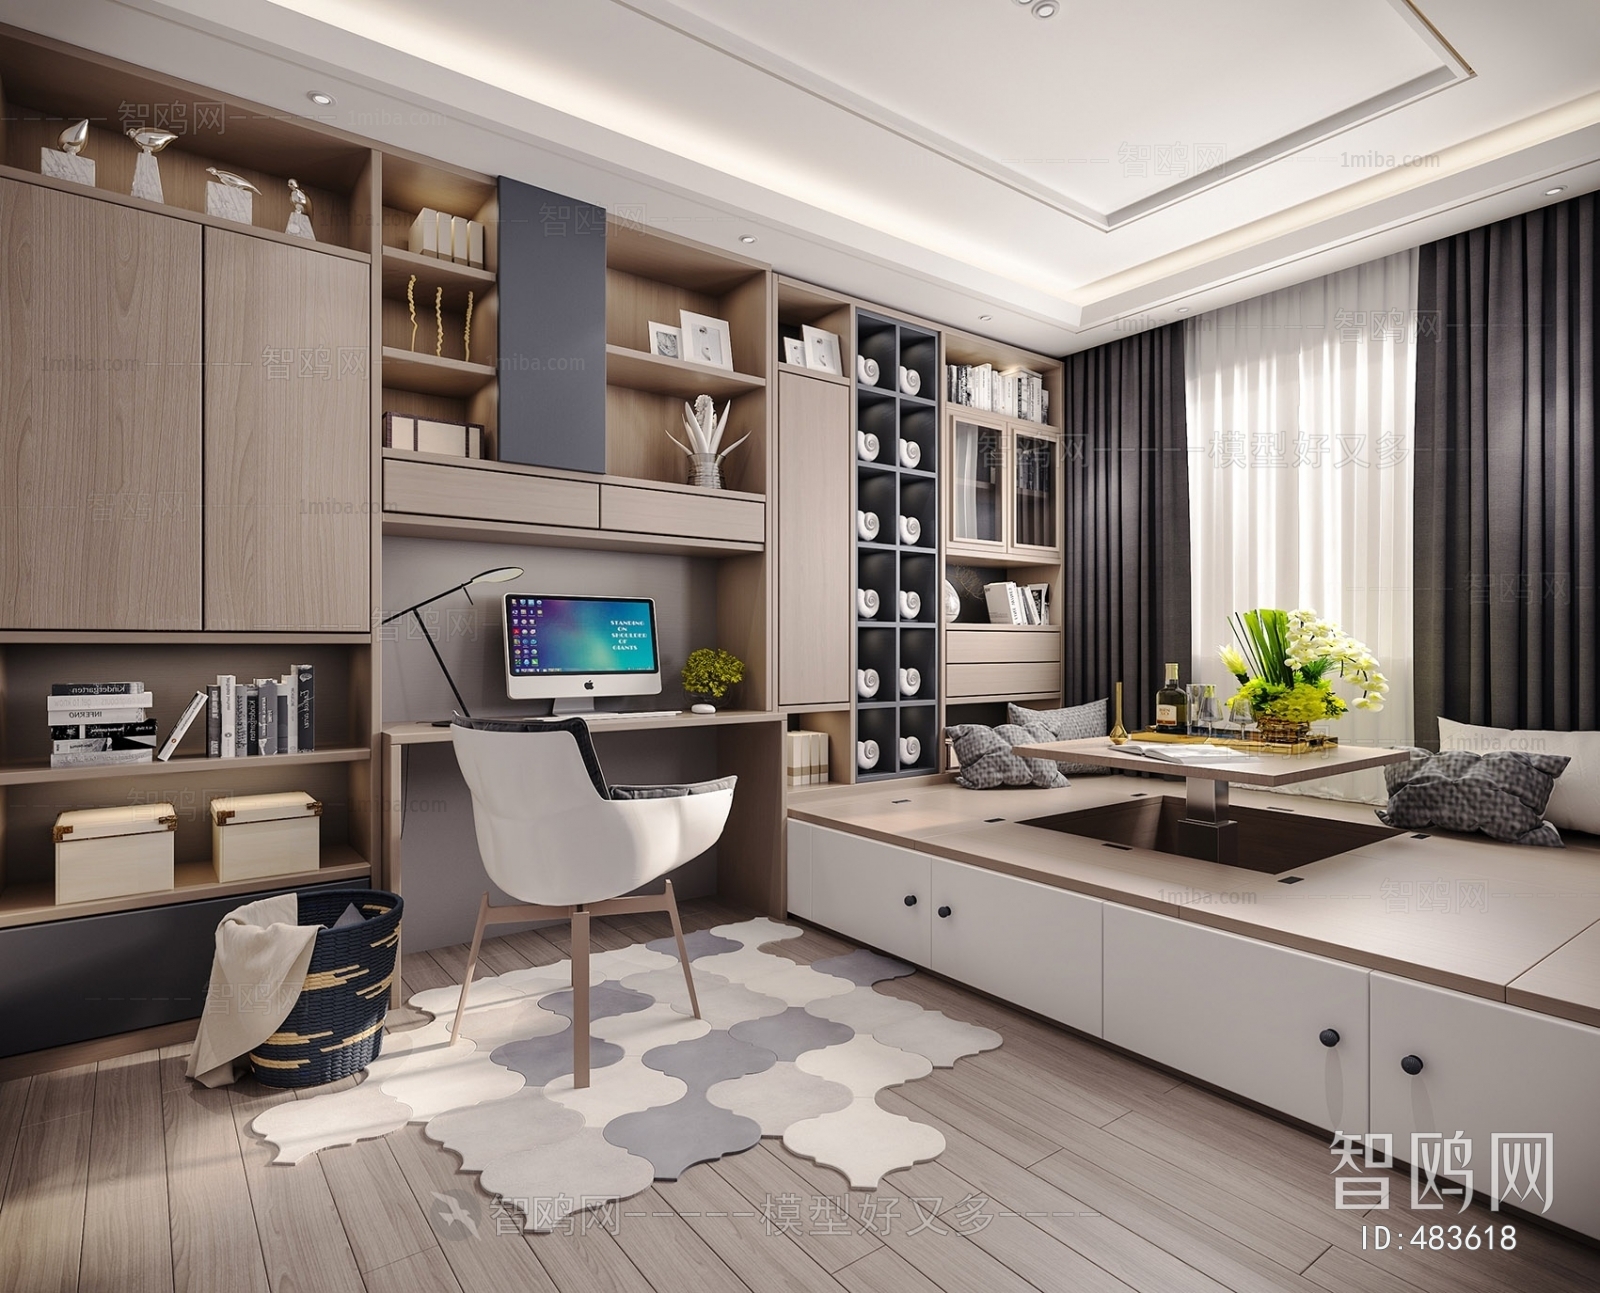 Modern Nordic Style Study Space